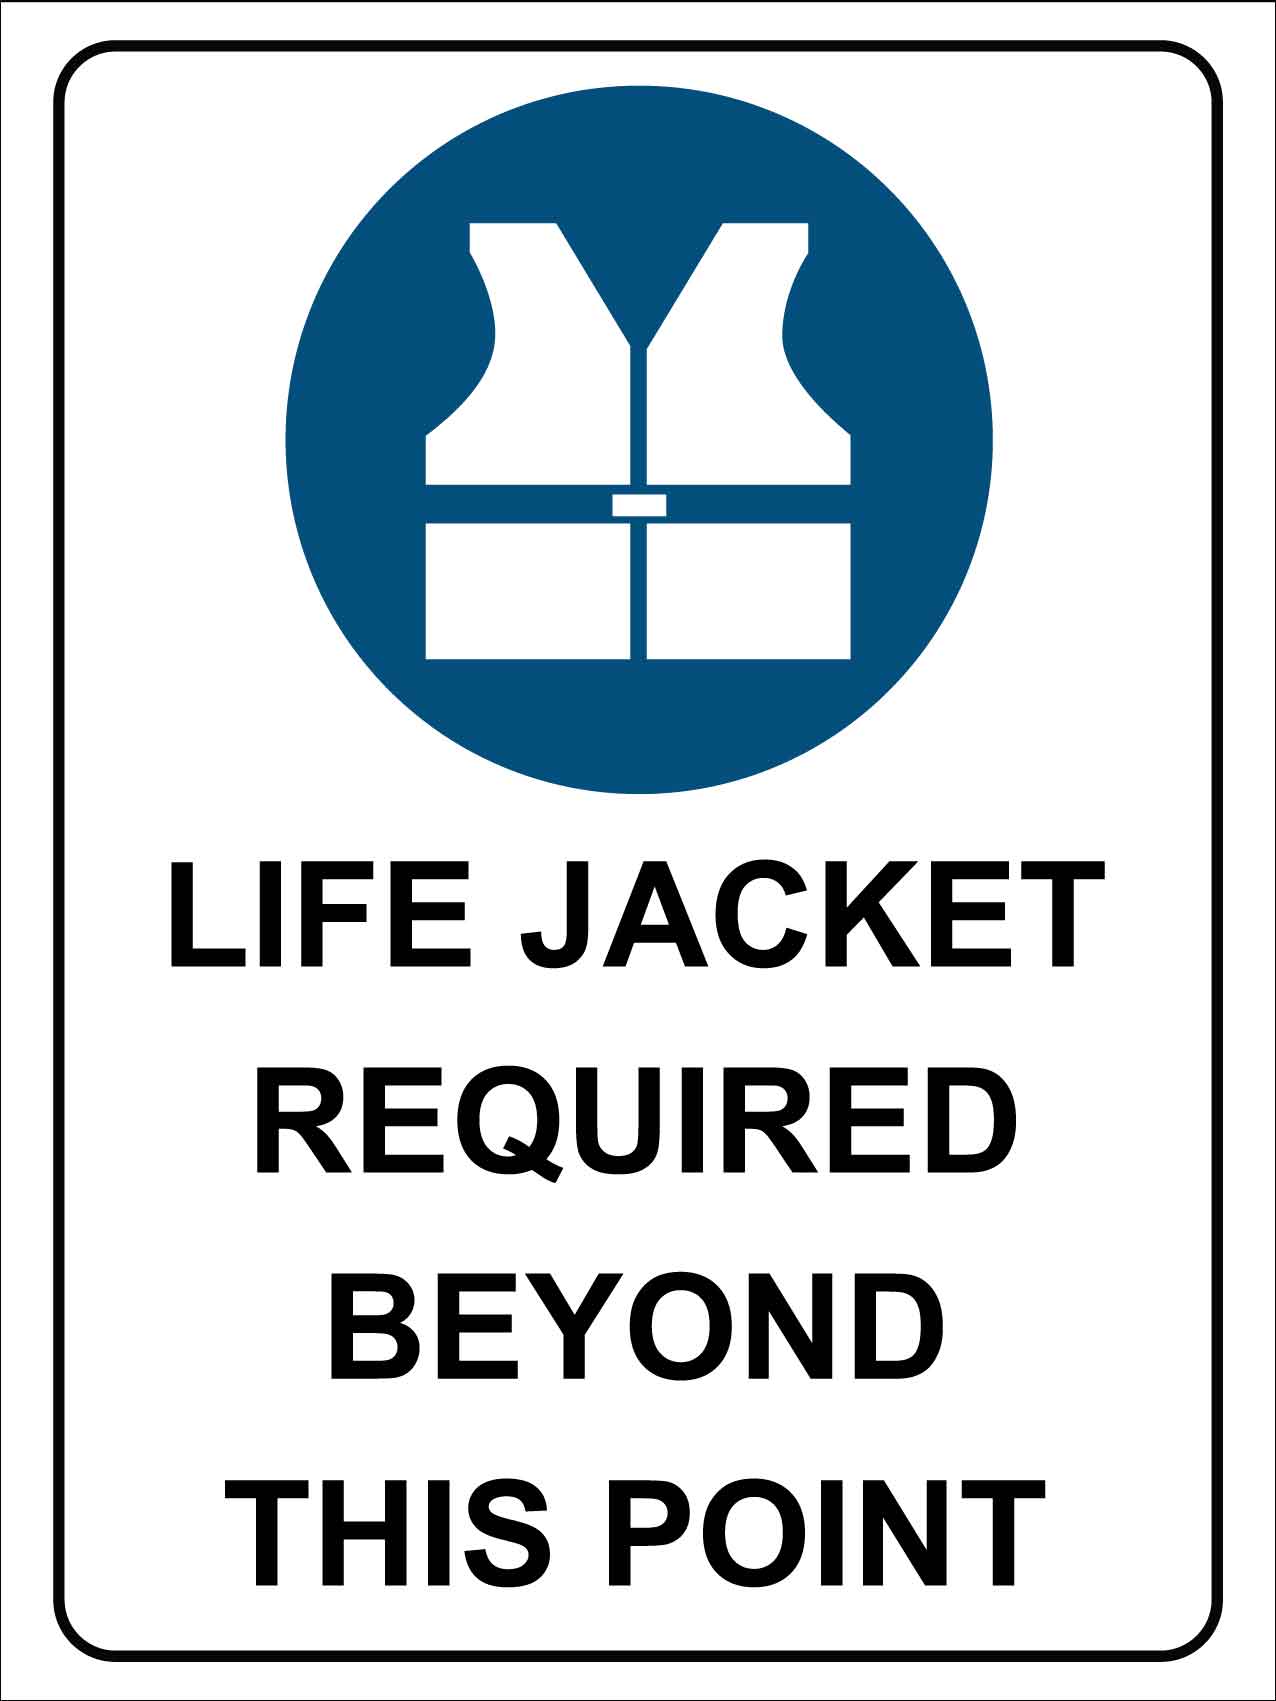 Life Jacket Required Beyond this Point Sign